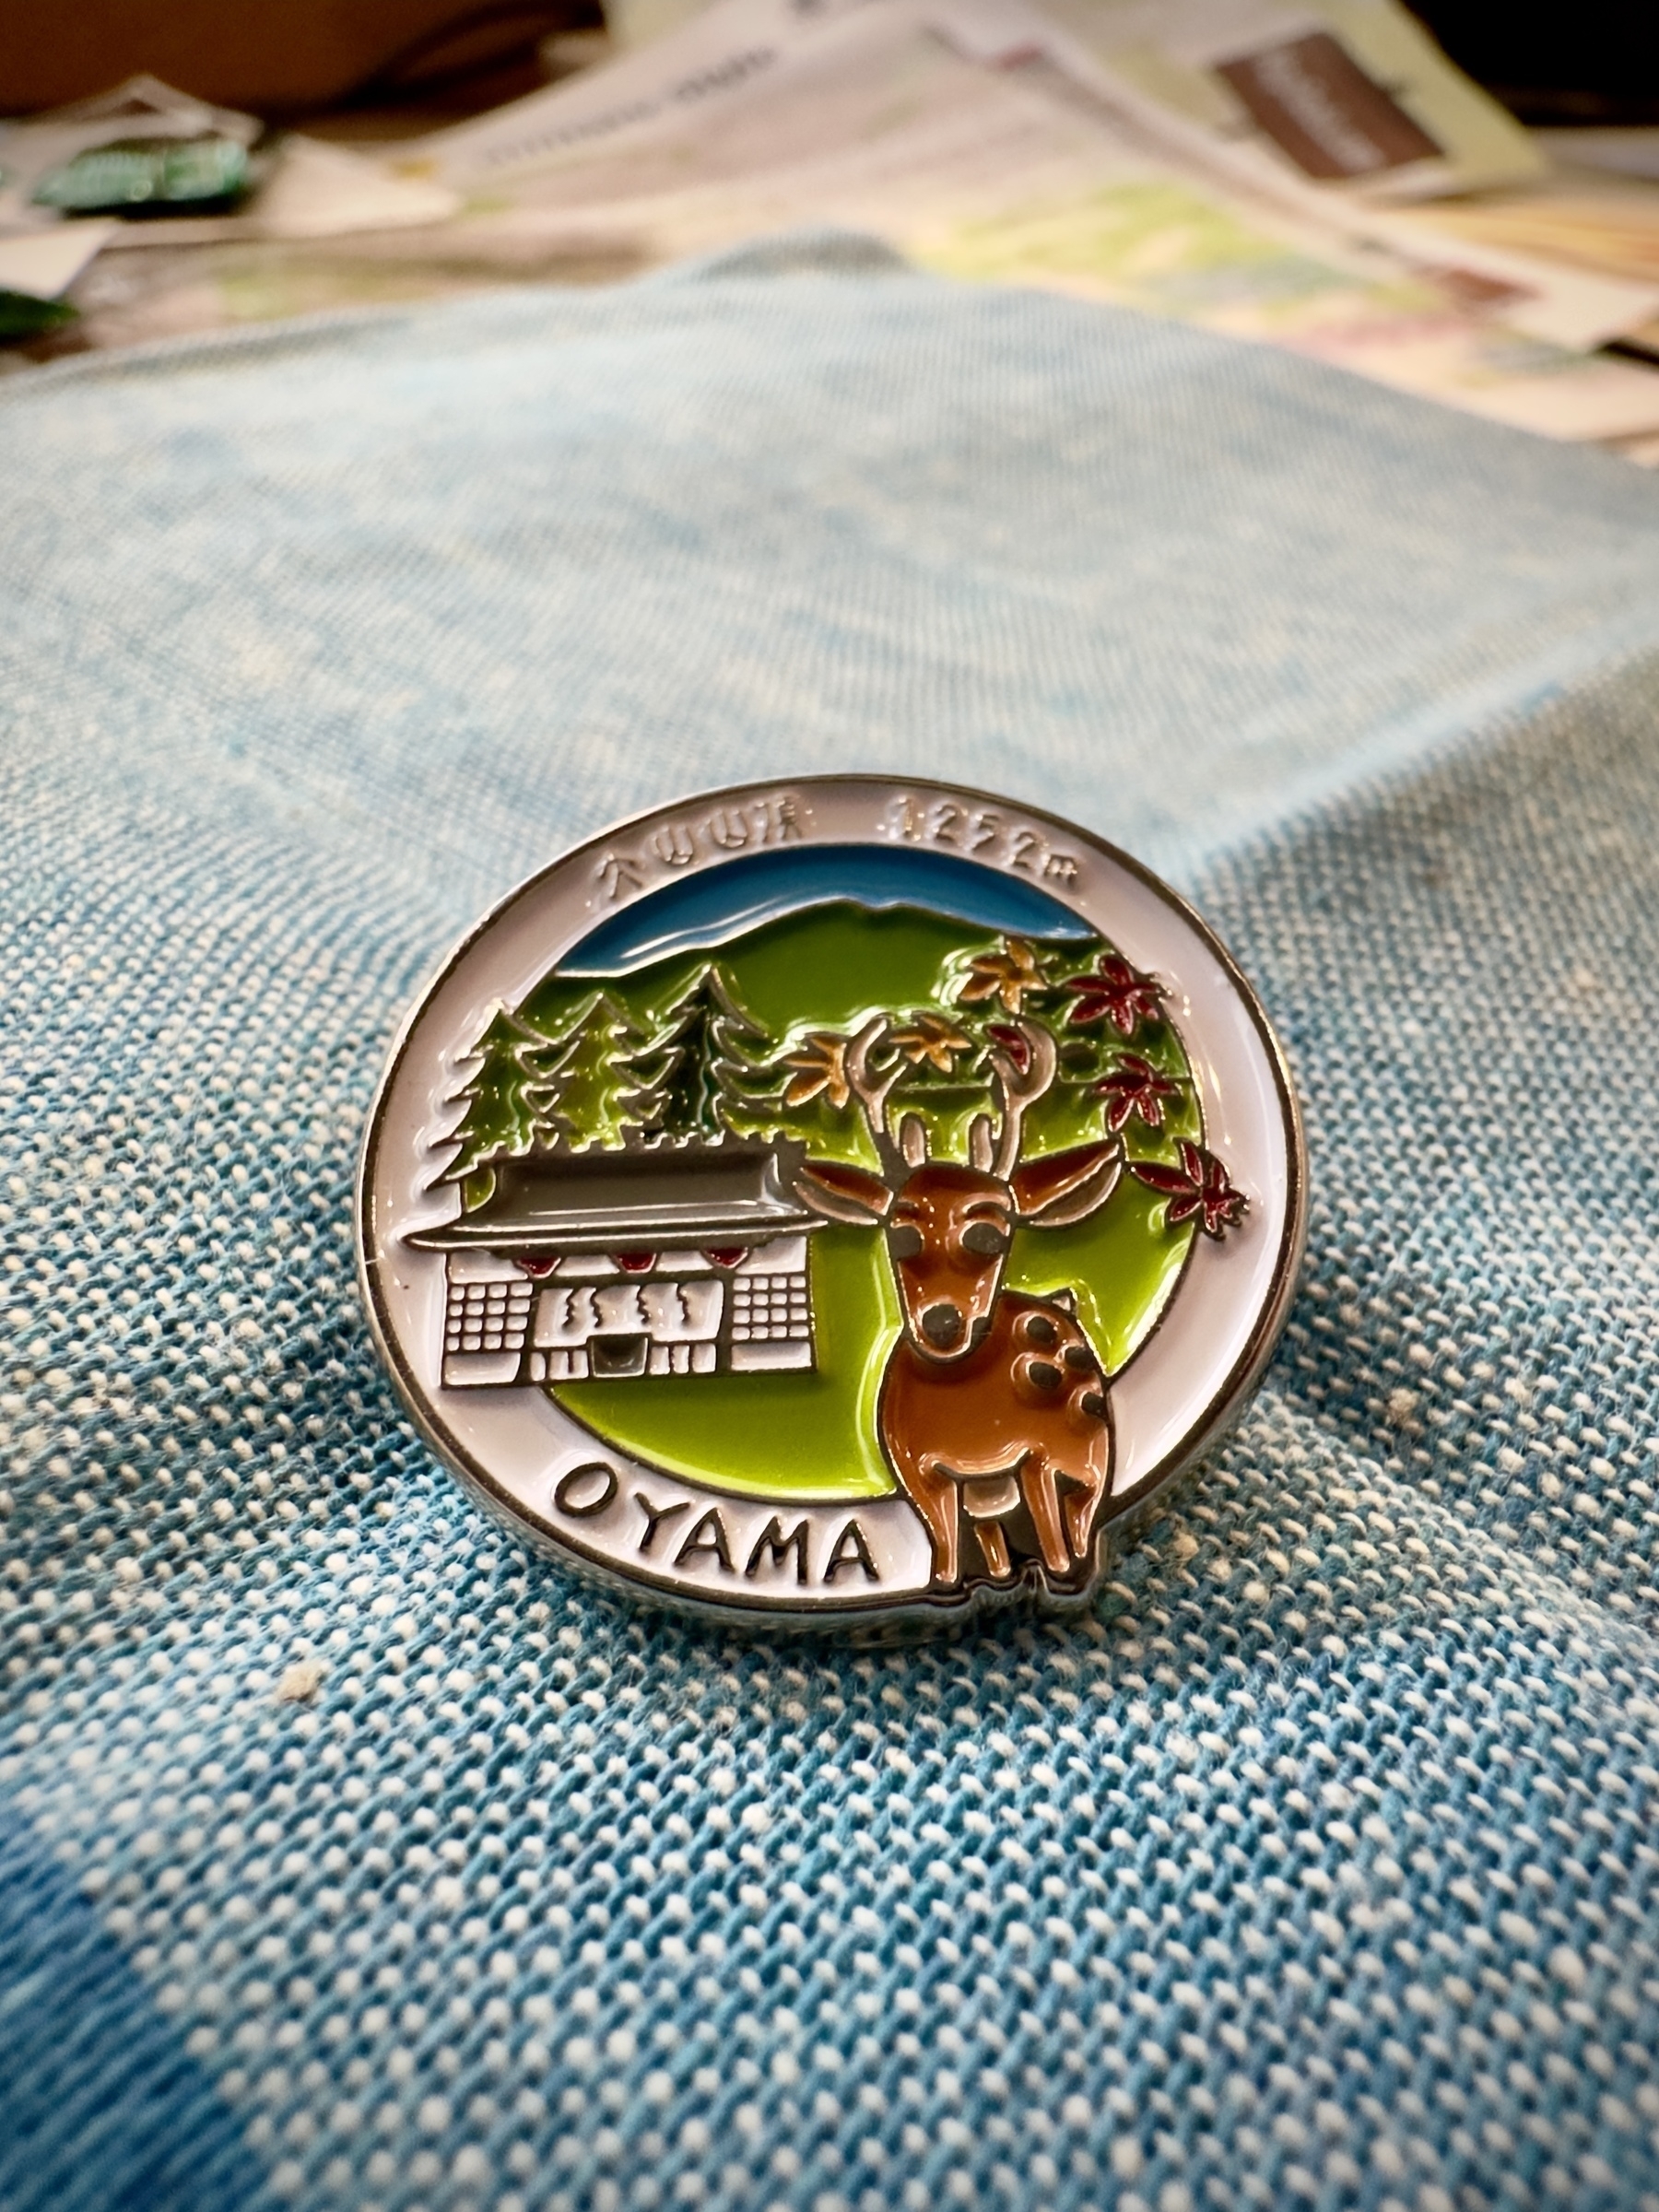 Pin badge from Mt. Oyama shop, showing elevation and the name in Japanese and English, depicting a shrine and deer in a forest scene.